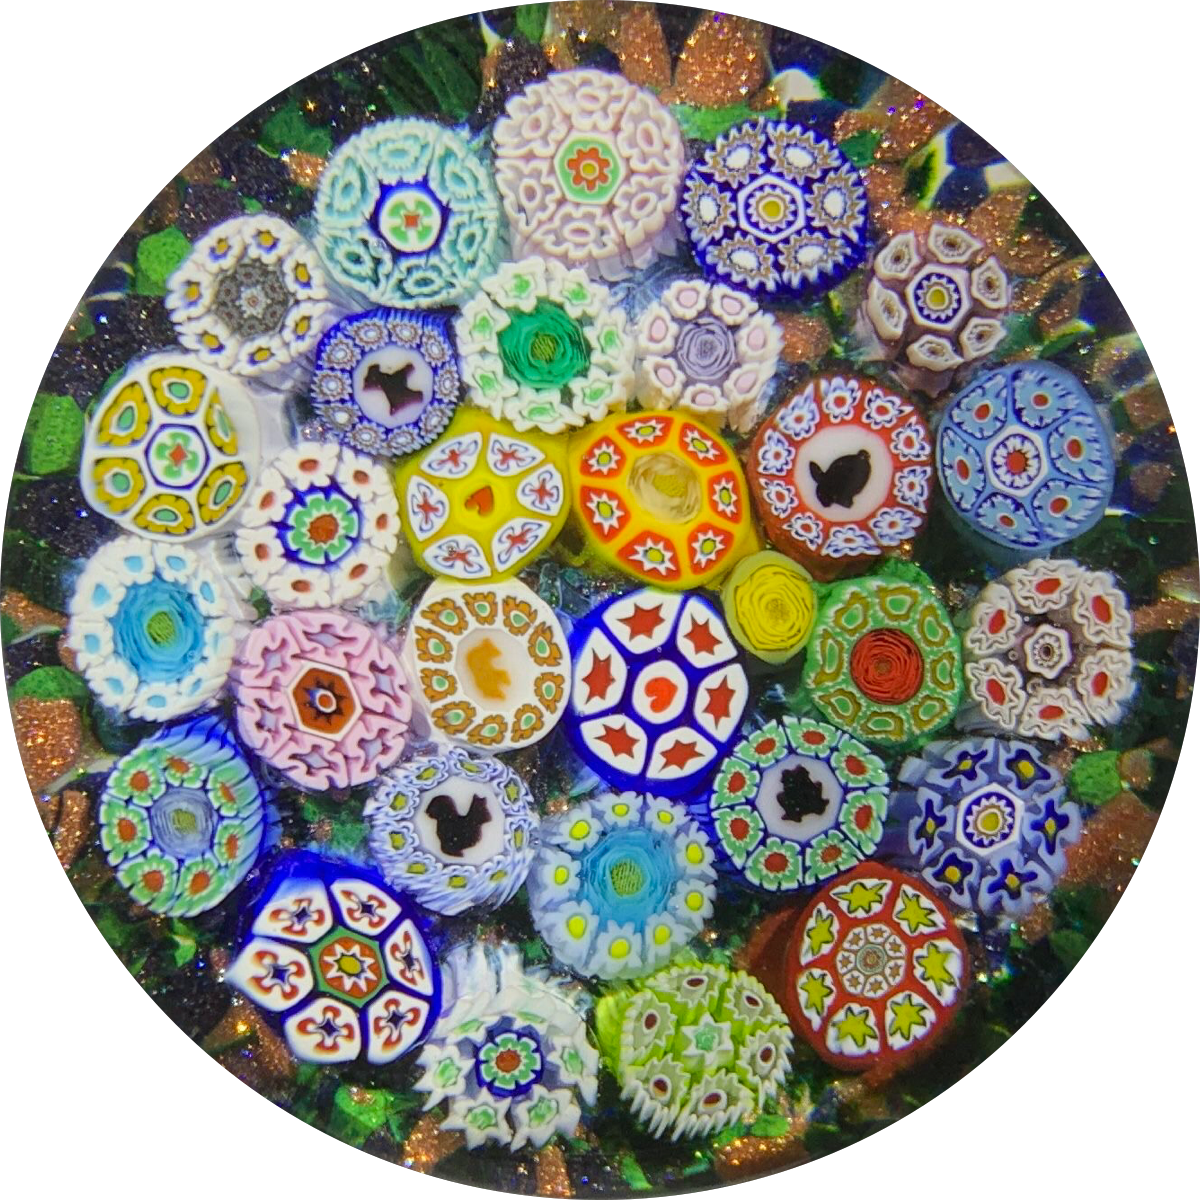 James Hart Complex Closepack Millefiori witch Silhouettes and Roses on Aventurine Ground